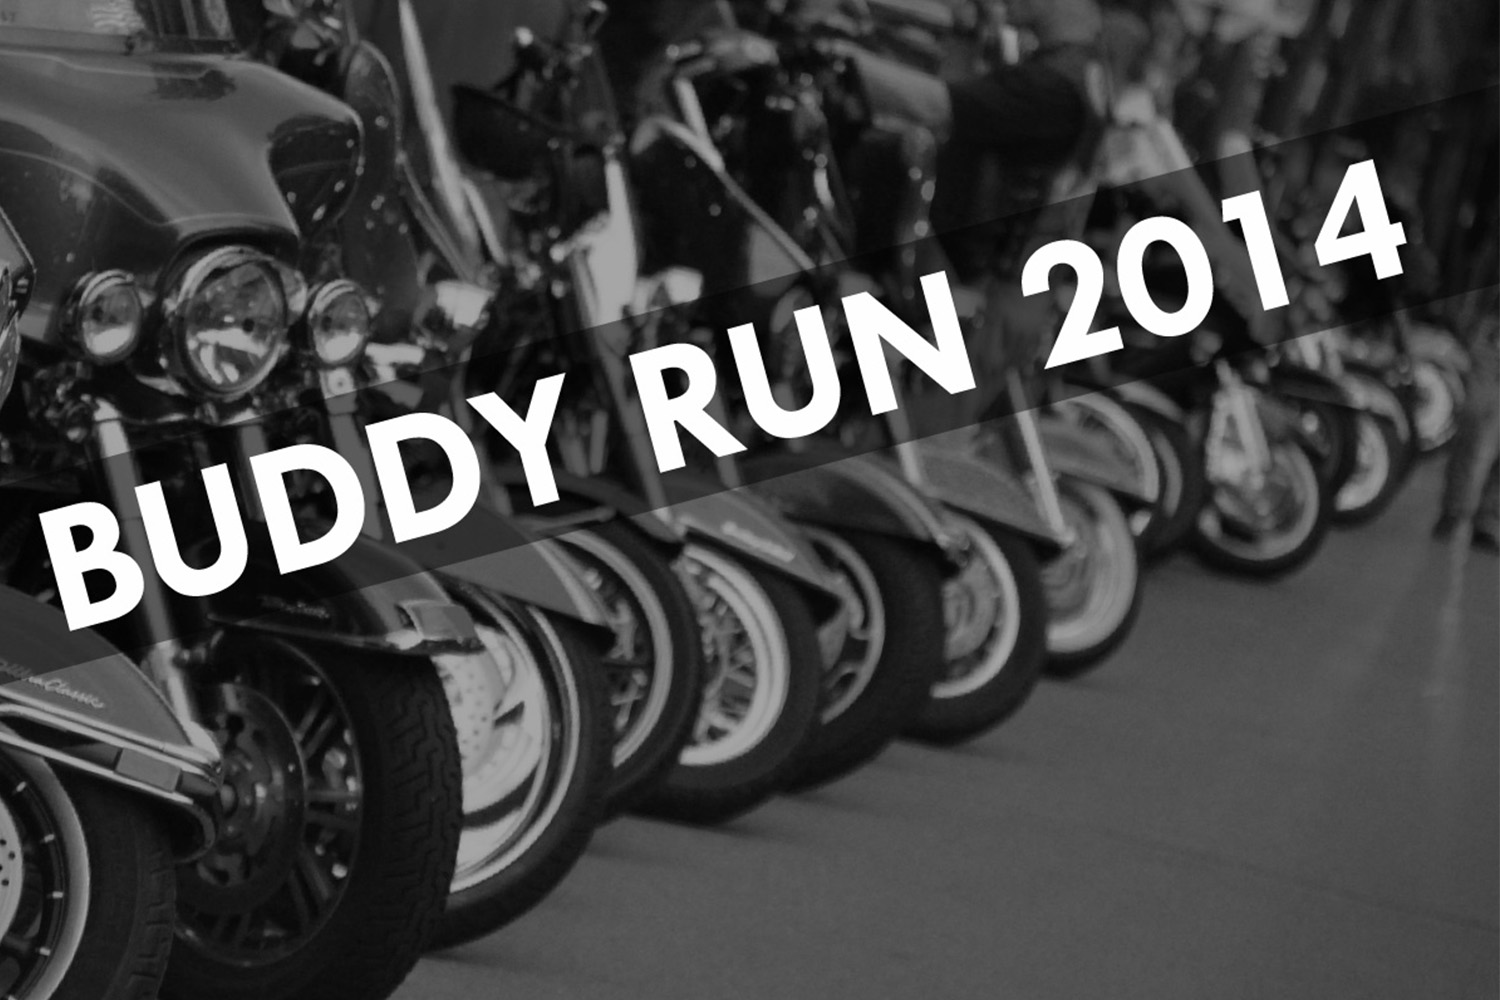 black and white photo of motorcycles, with "Buddy run 2014" banner accross 